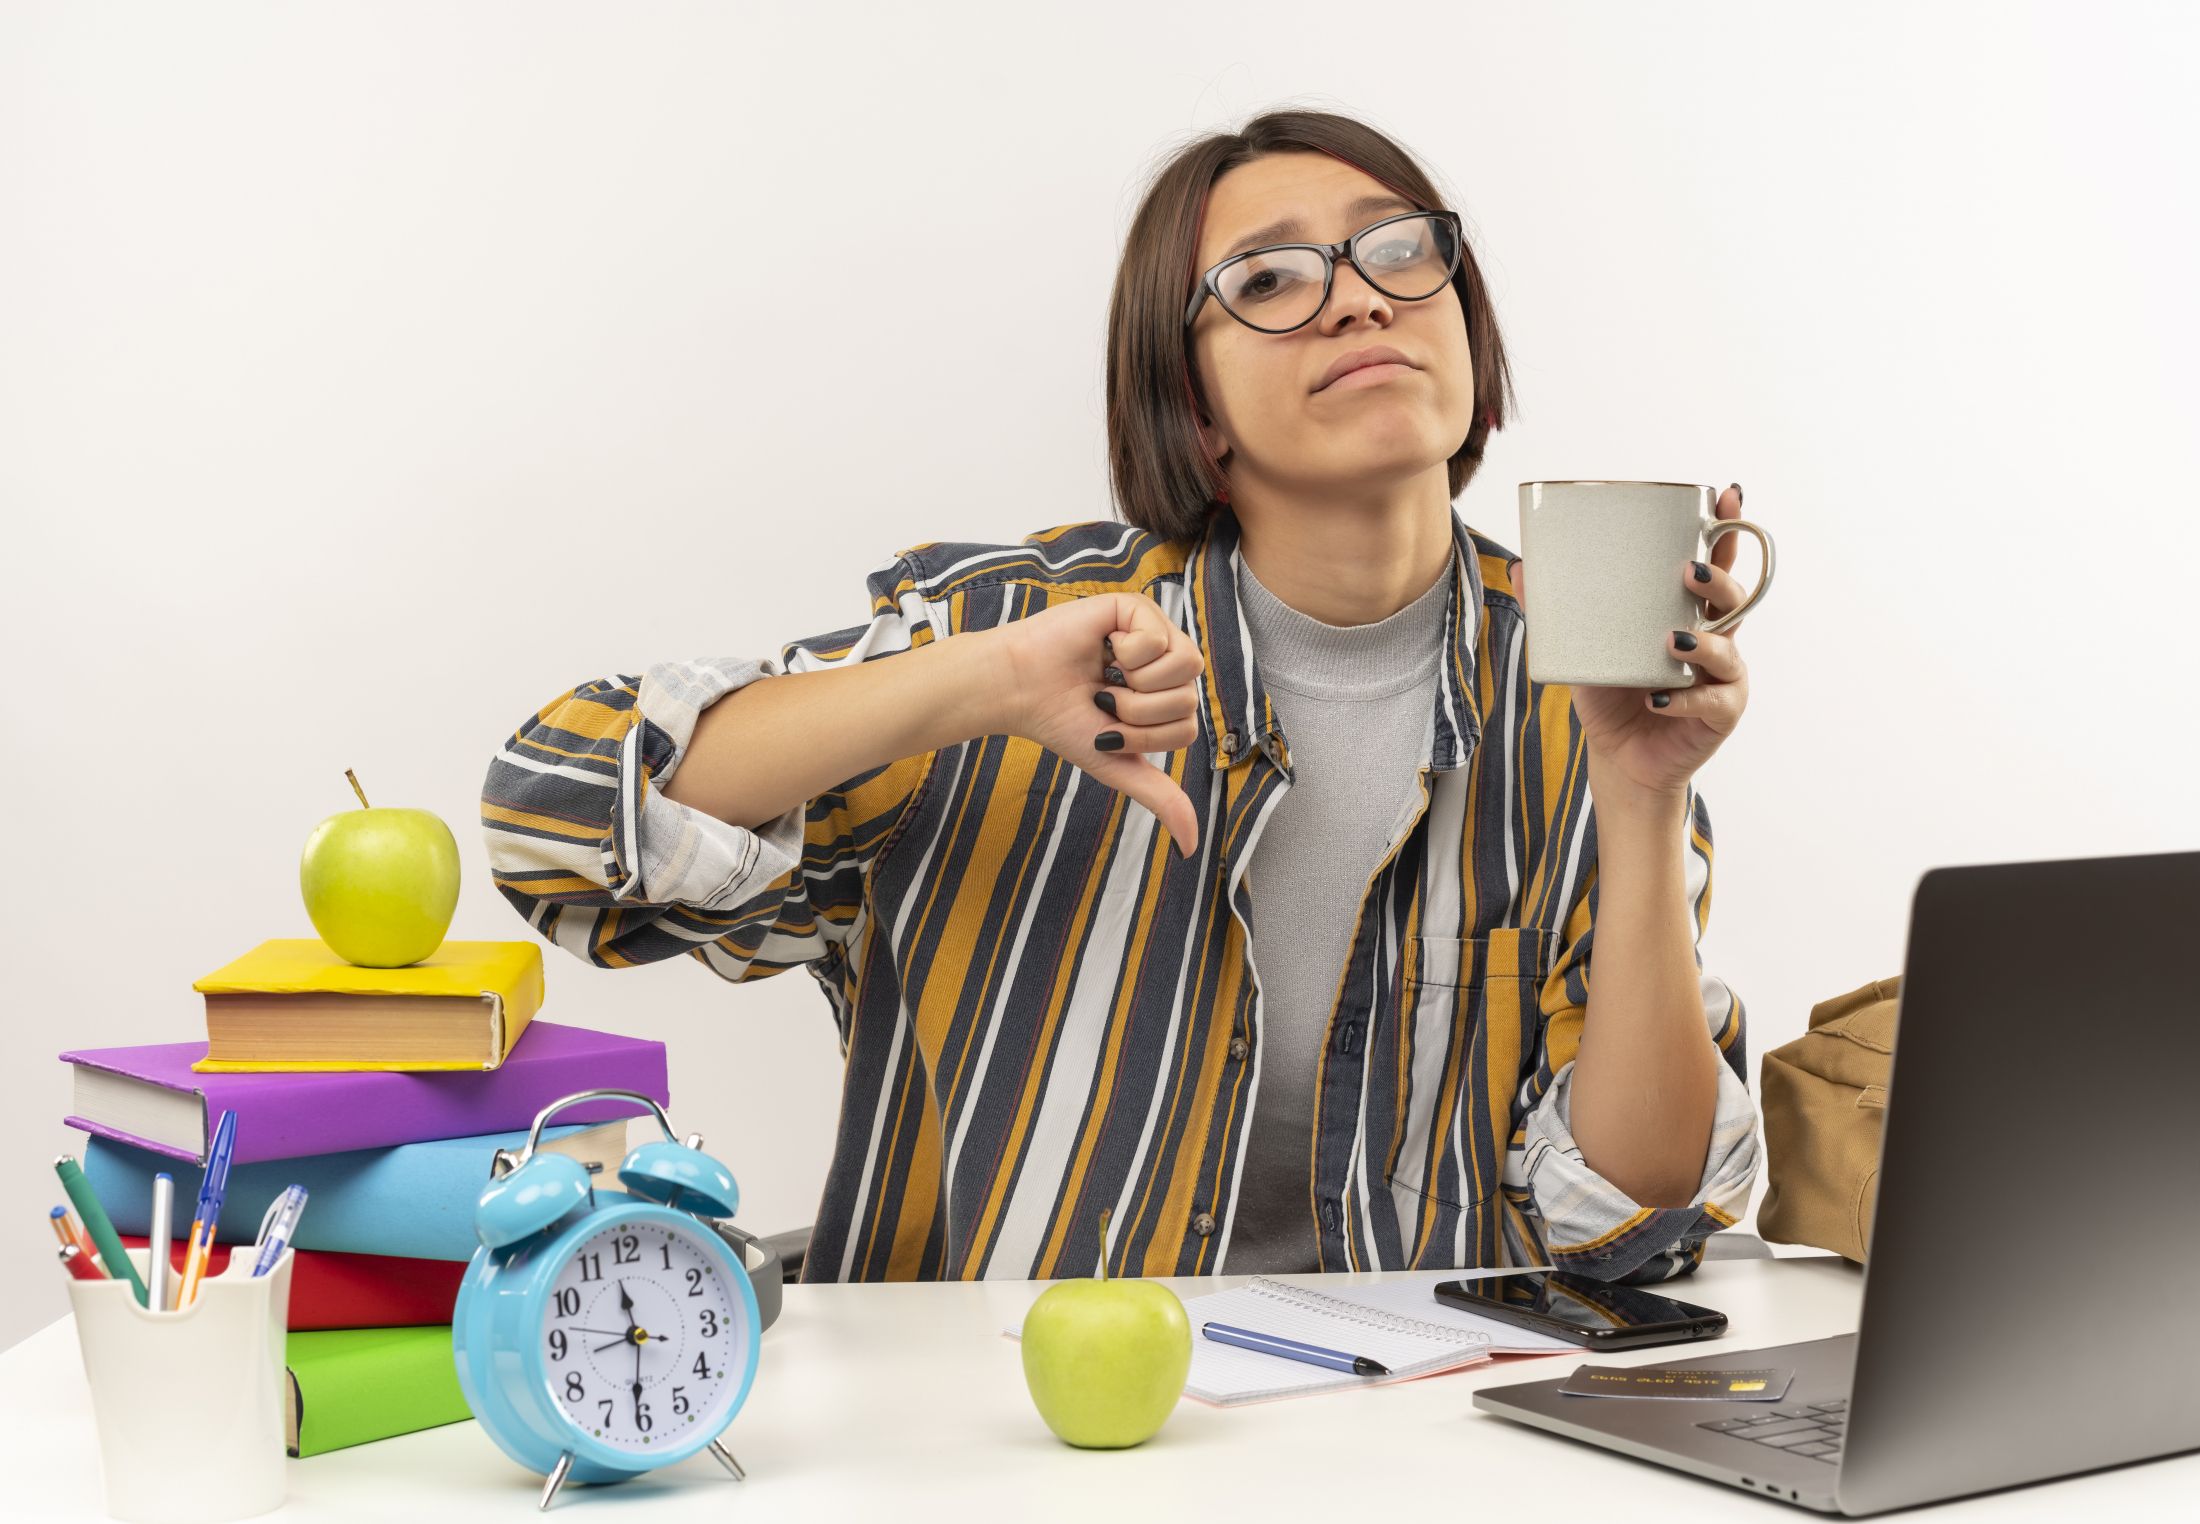 unpleased-young-student-girl-wearing-glasses-sitting-desk-with-university-tools-holding-cup-coffee-showing-thumb-down-isolated-white-background.jpg